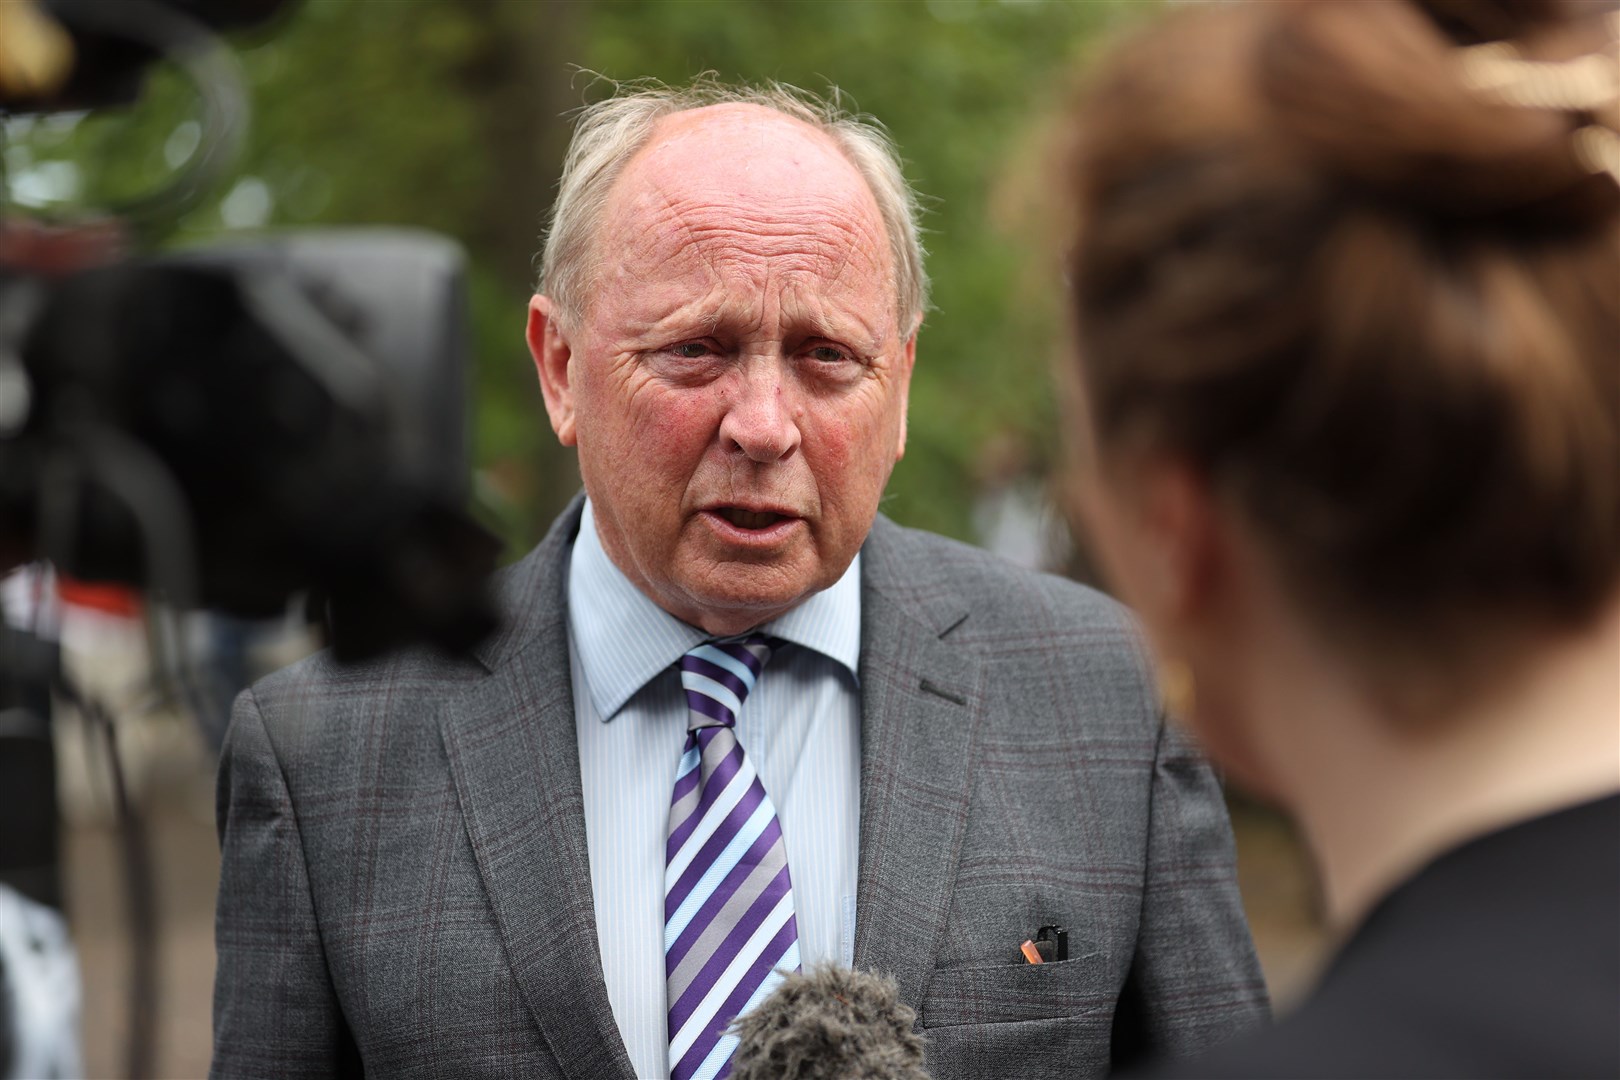 TUV leader Jim Allister said putting up posters is a form of political activism (Liam McBurney/PA)